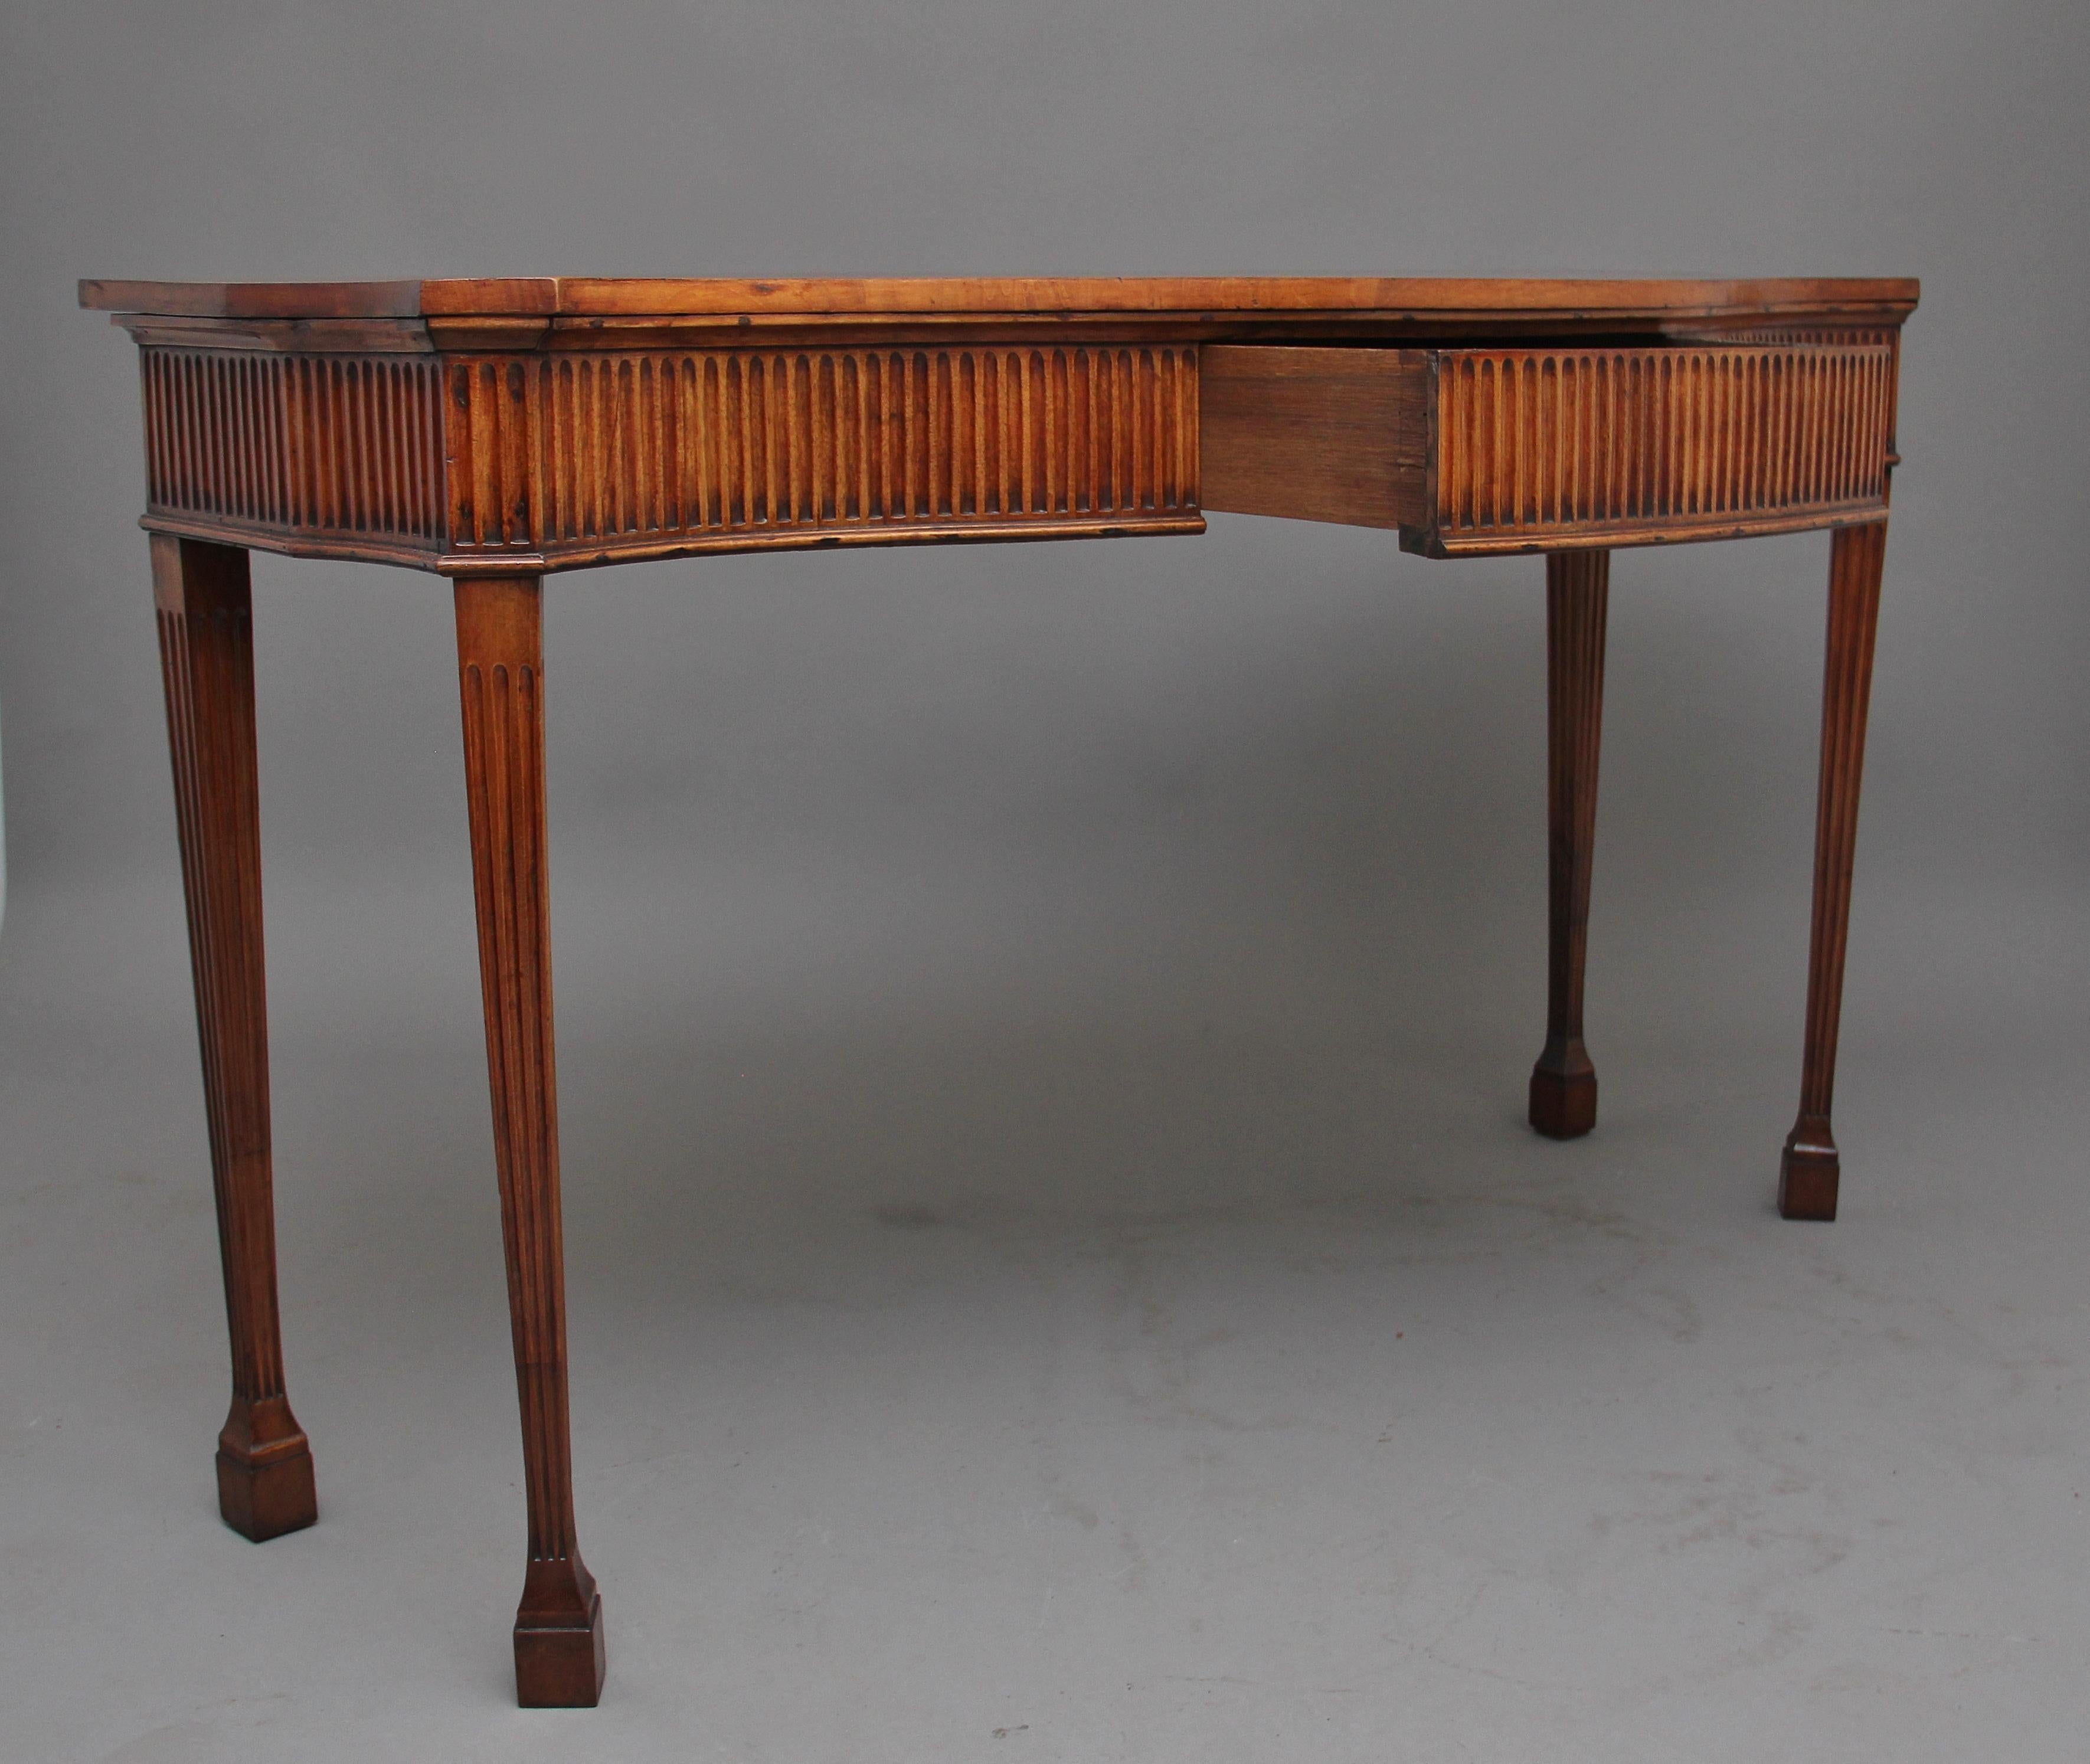 Early 19th century satinwood serpentine serving table in the Adams style, having a lovely figured and shaped top above a deep reeded frieze with a central frieze drawer, supported on four tapering and fluted legs terminating on block feet, circa